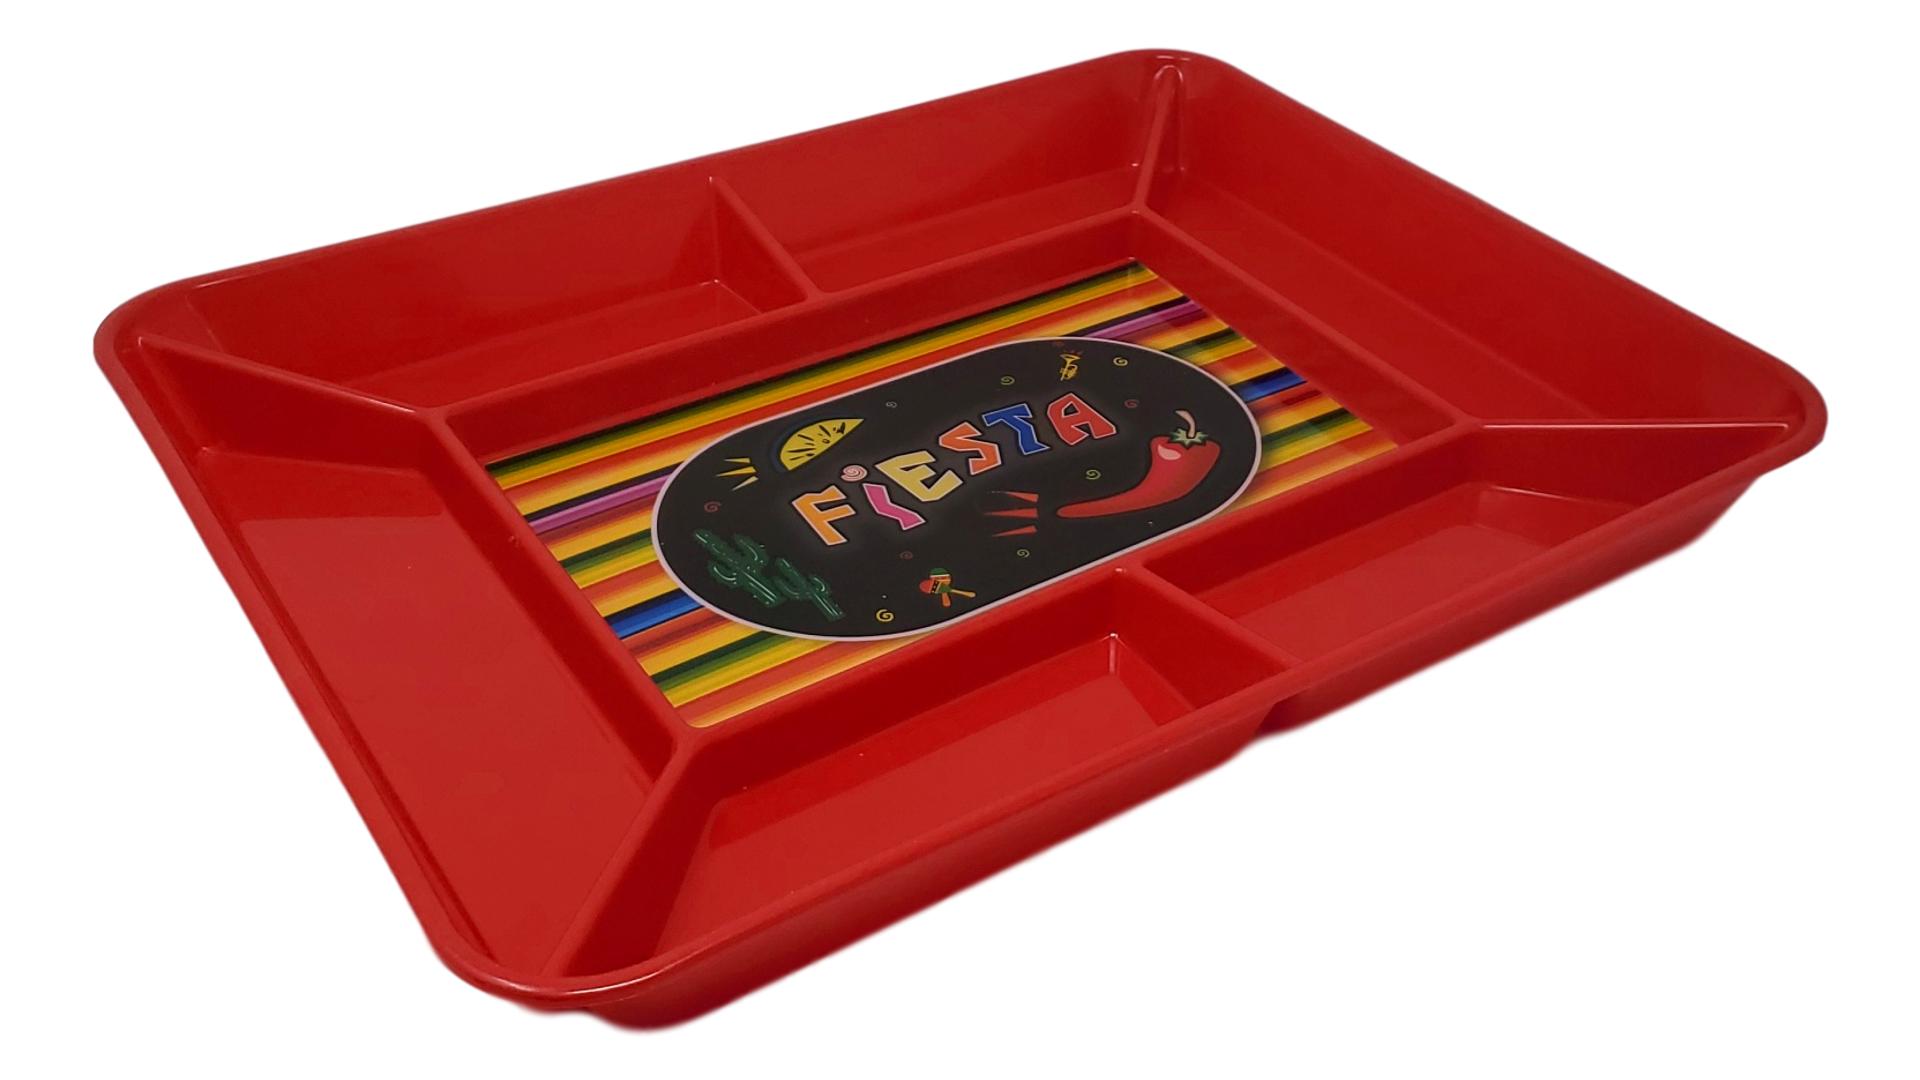 Fiesta Time Plastic Snack Tray Serving Platter 14 X 18 inches